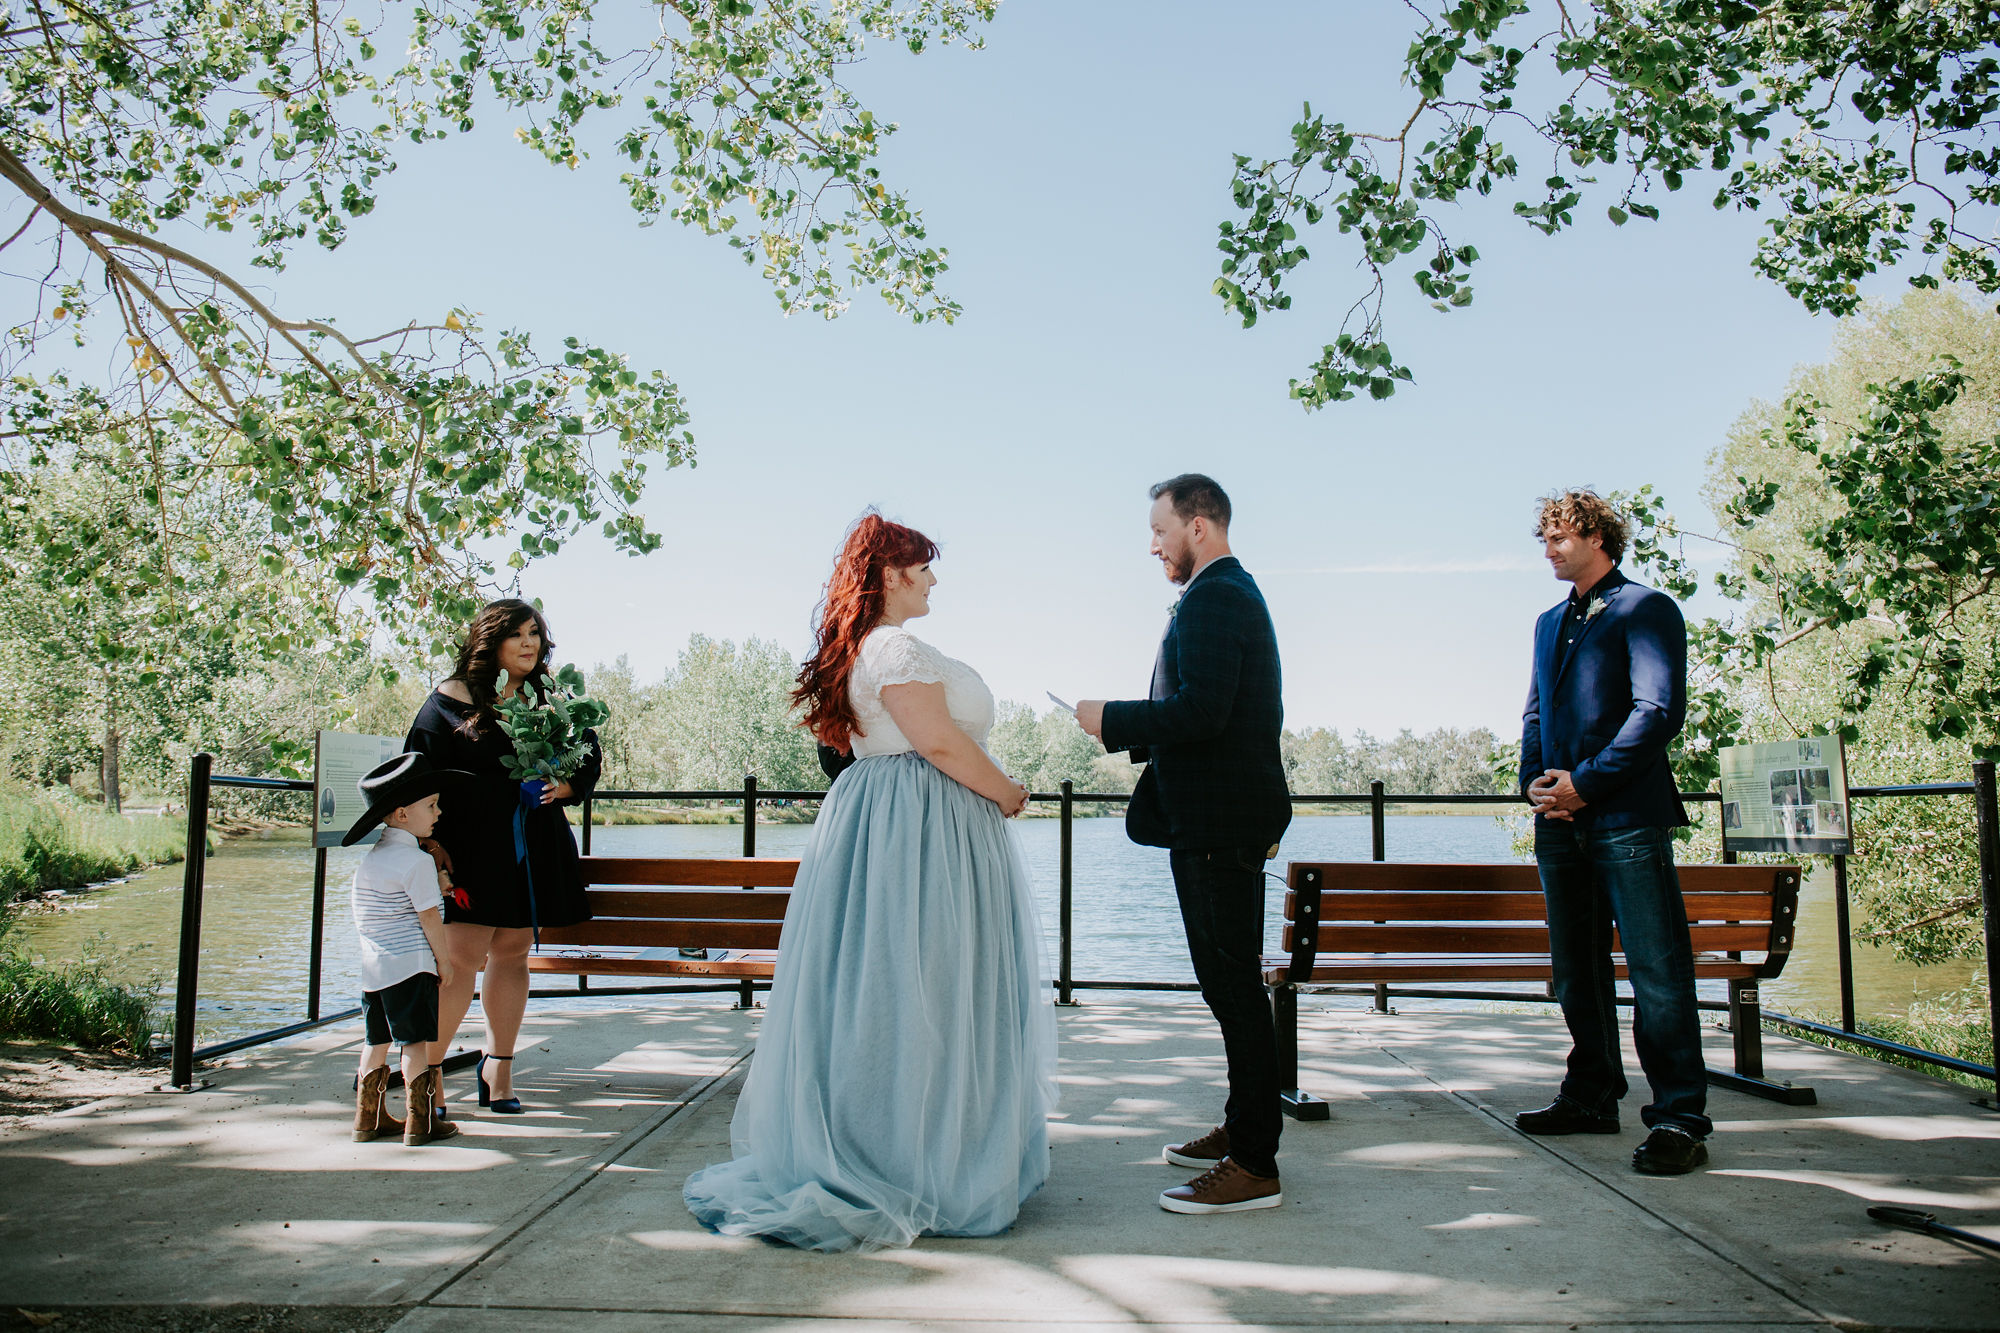 Young Hip & Married elopement at Carburn Park in Calgary with Deanna Rachel Photography 